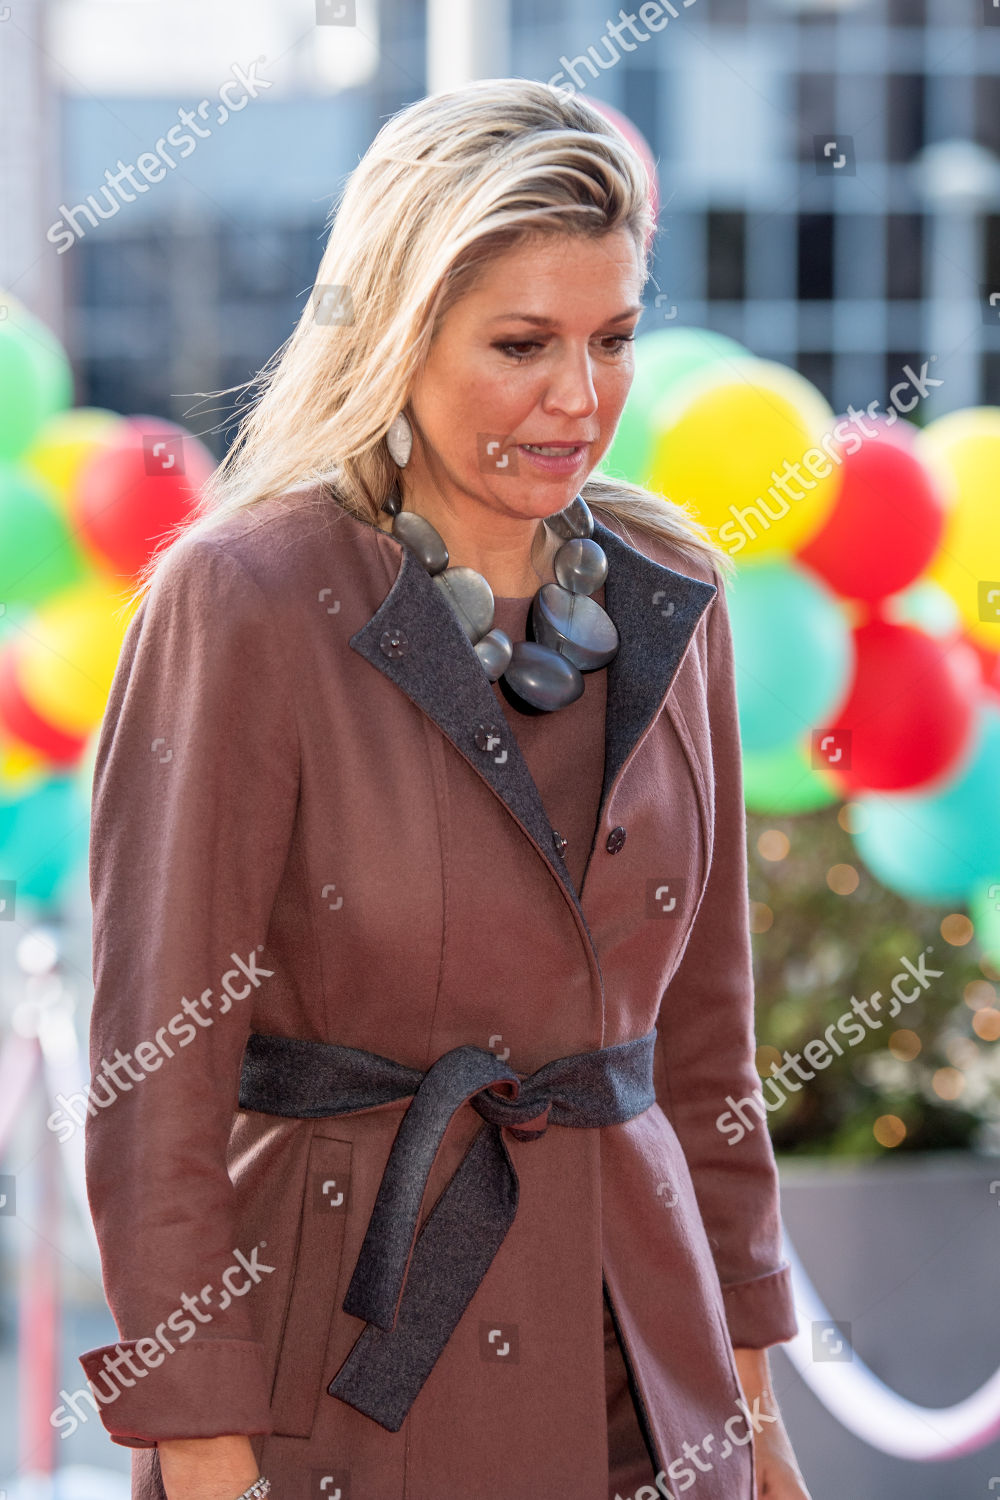 queen-maxima-visit-to-113-suicide-prevention-amsterdam-the-netherlands-shutterstock-editorial-9958871j.jpg